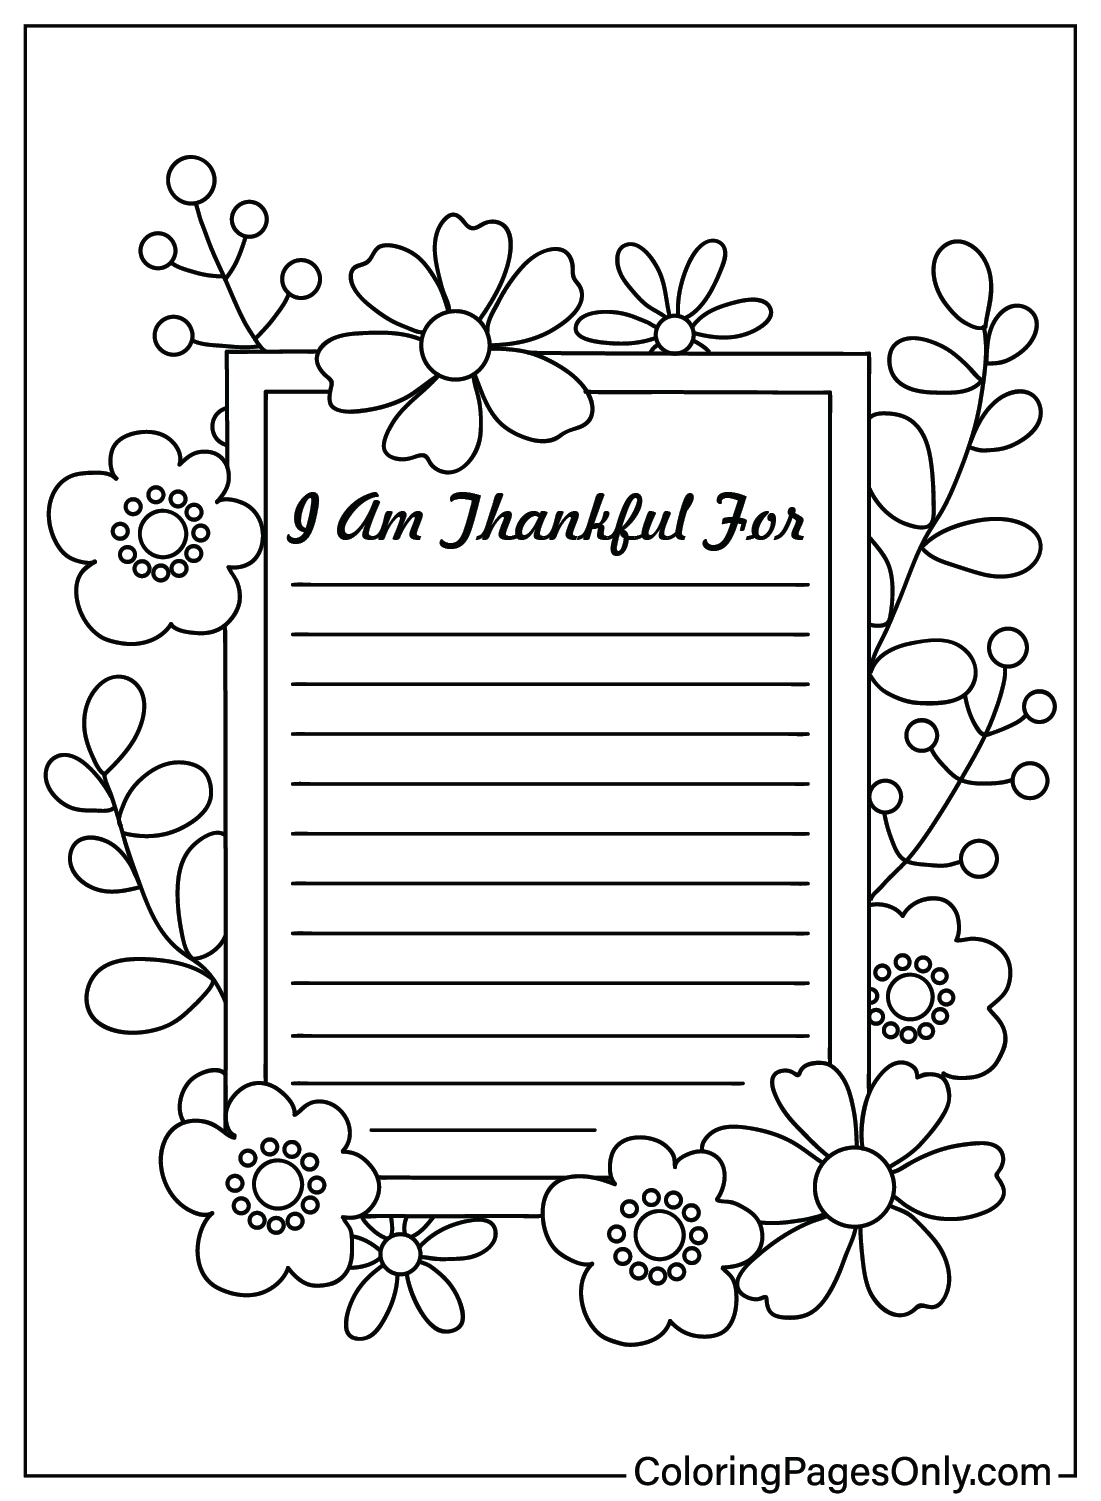 I Am Thankful For Coloring Page Free Printable from I Am Thankful For